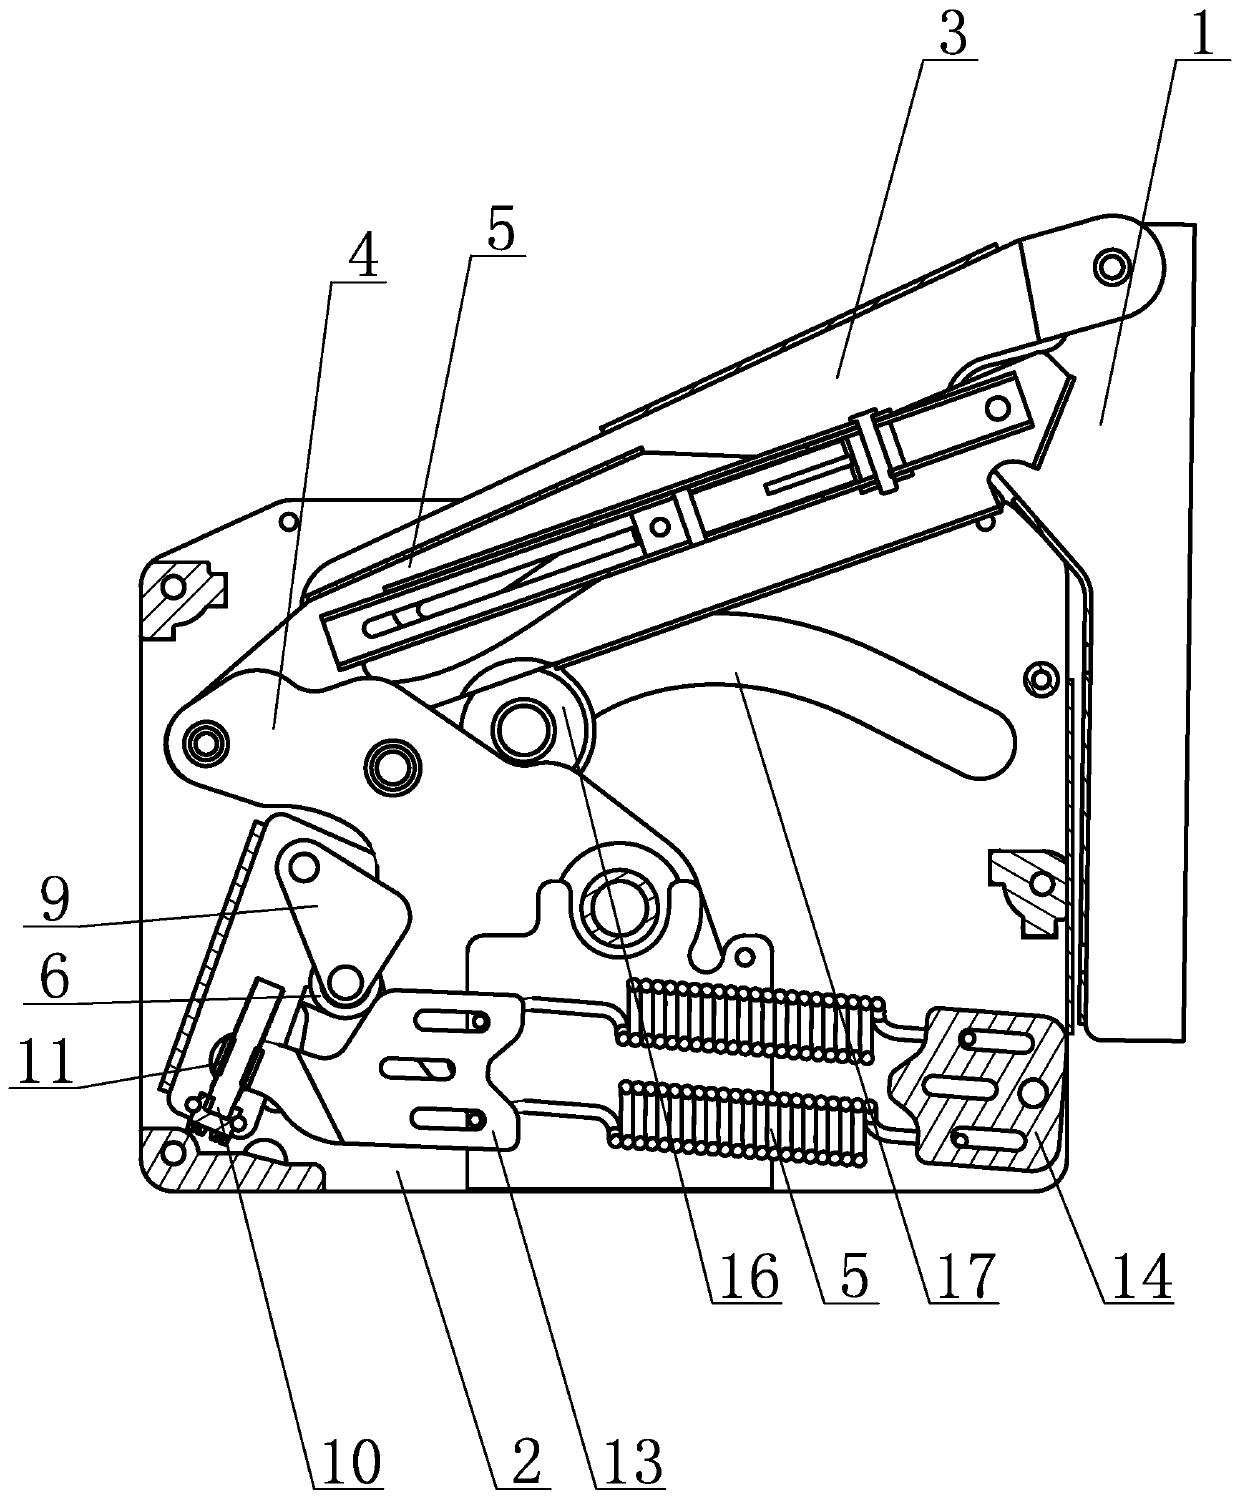 Upturning door hinge with opening and closing assistance